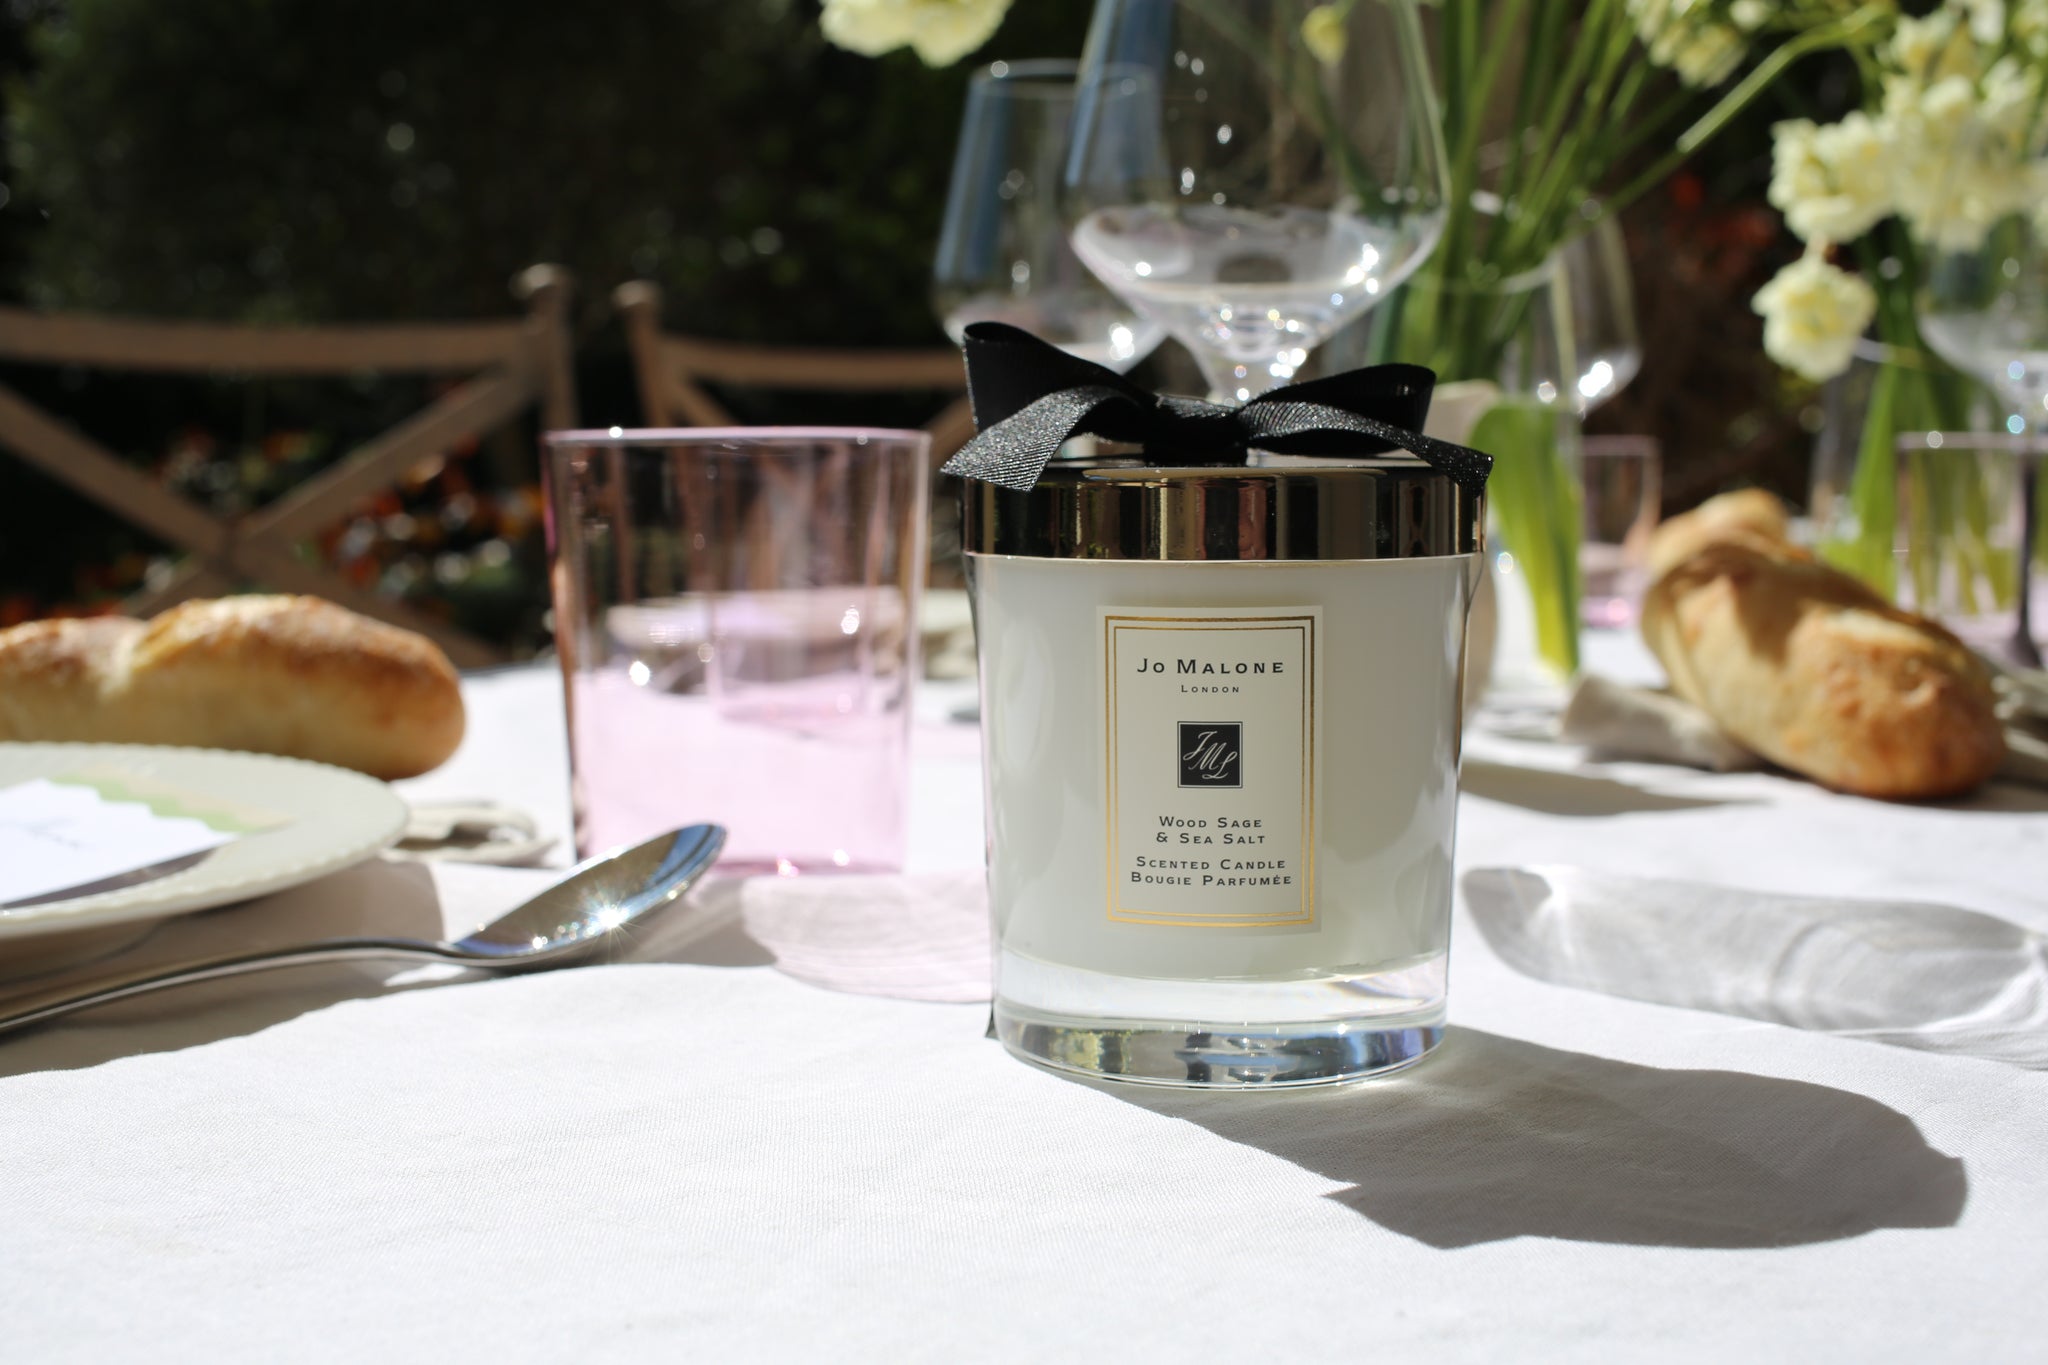 Jo Malone Scented Candle on linen tableware